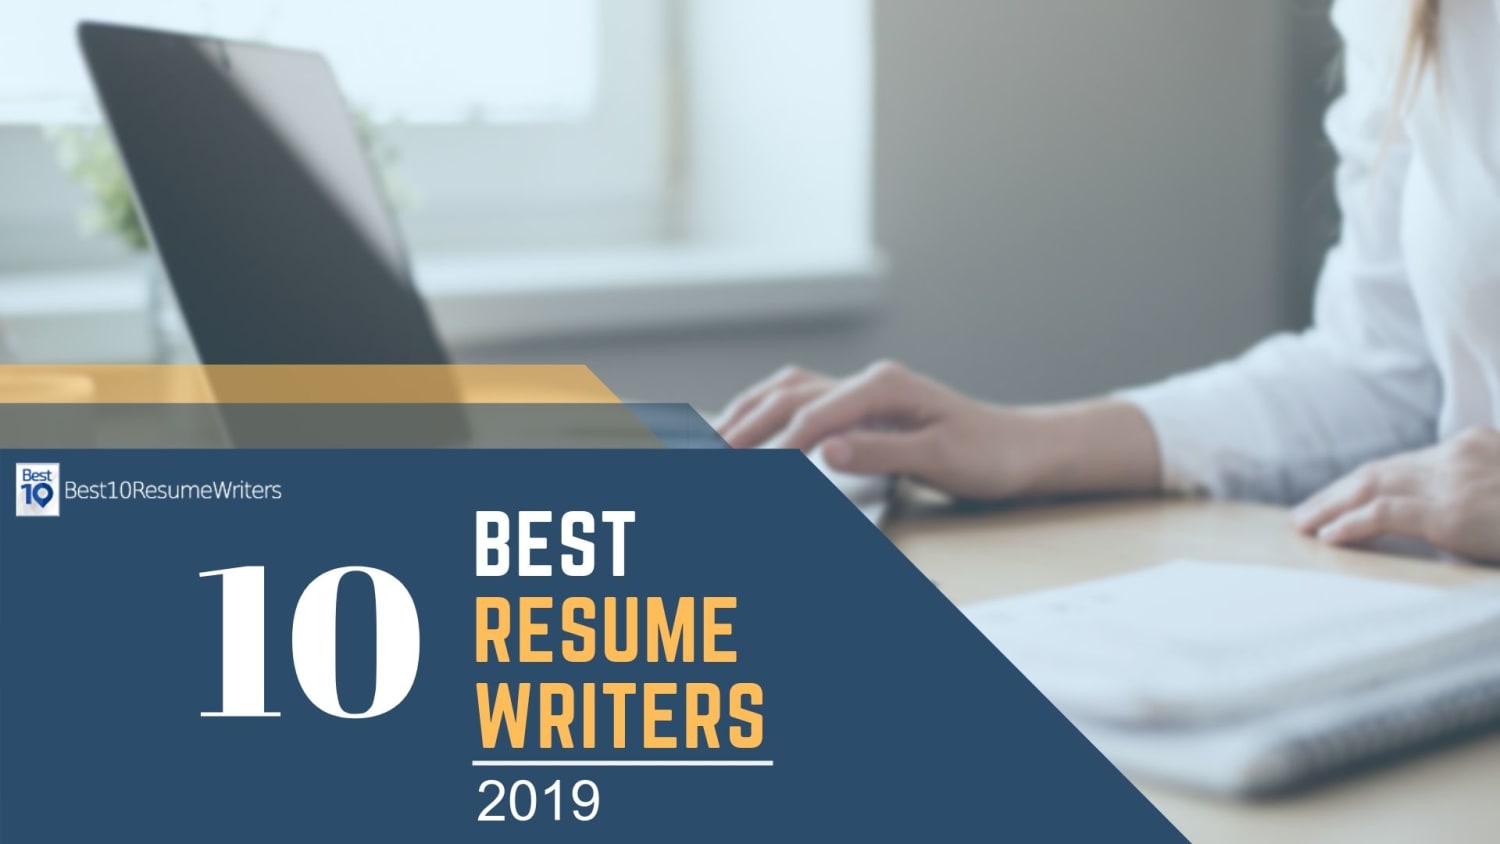 Best Resume Writers in the United States: 2019 Edition